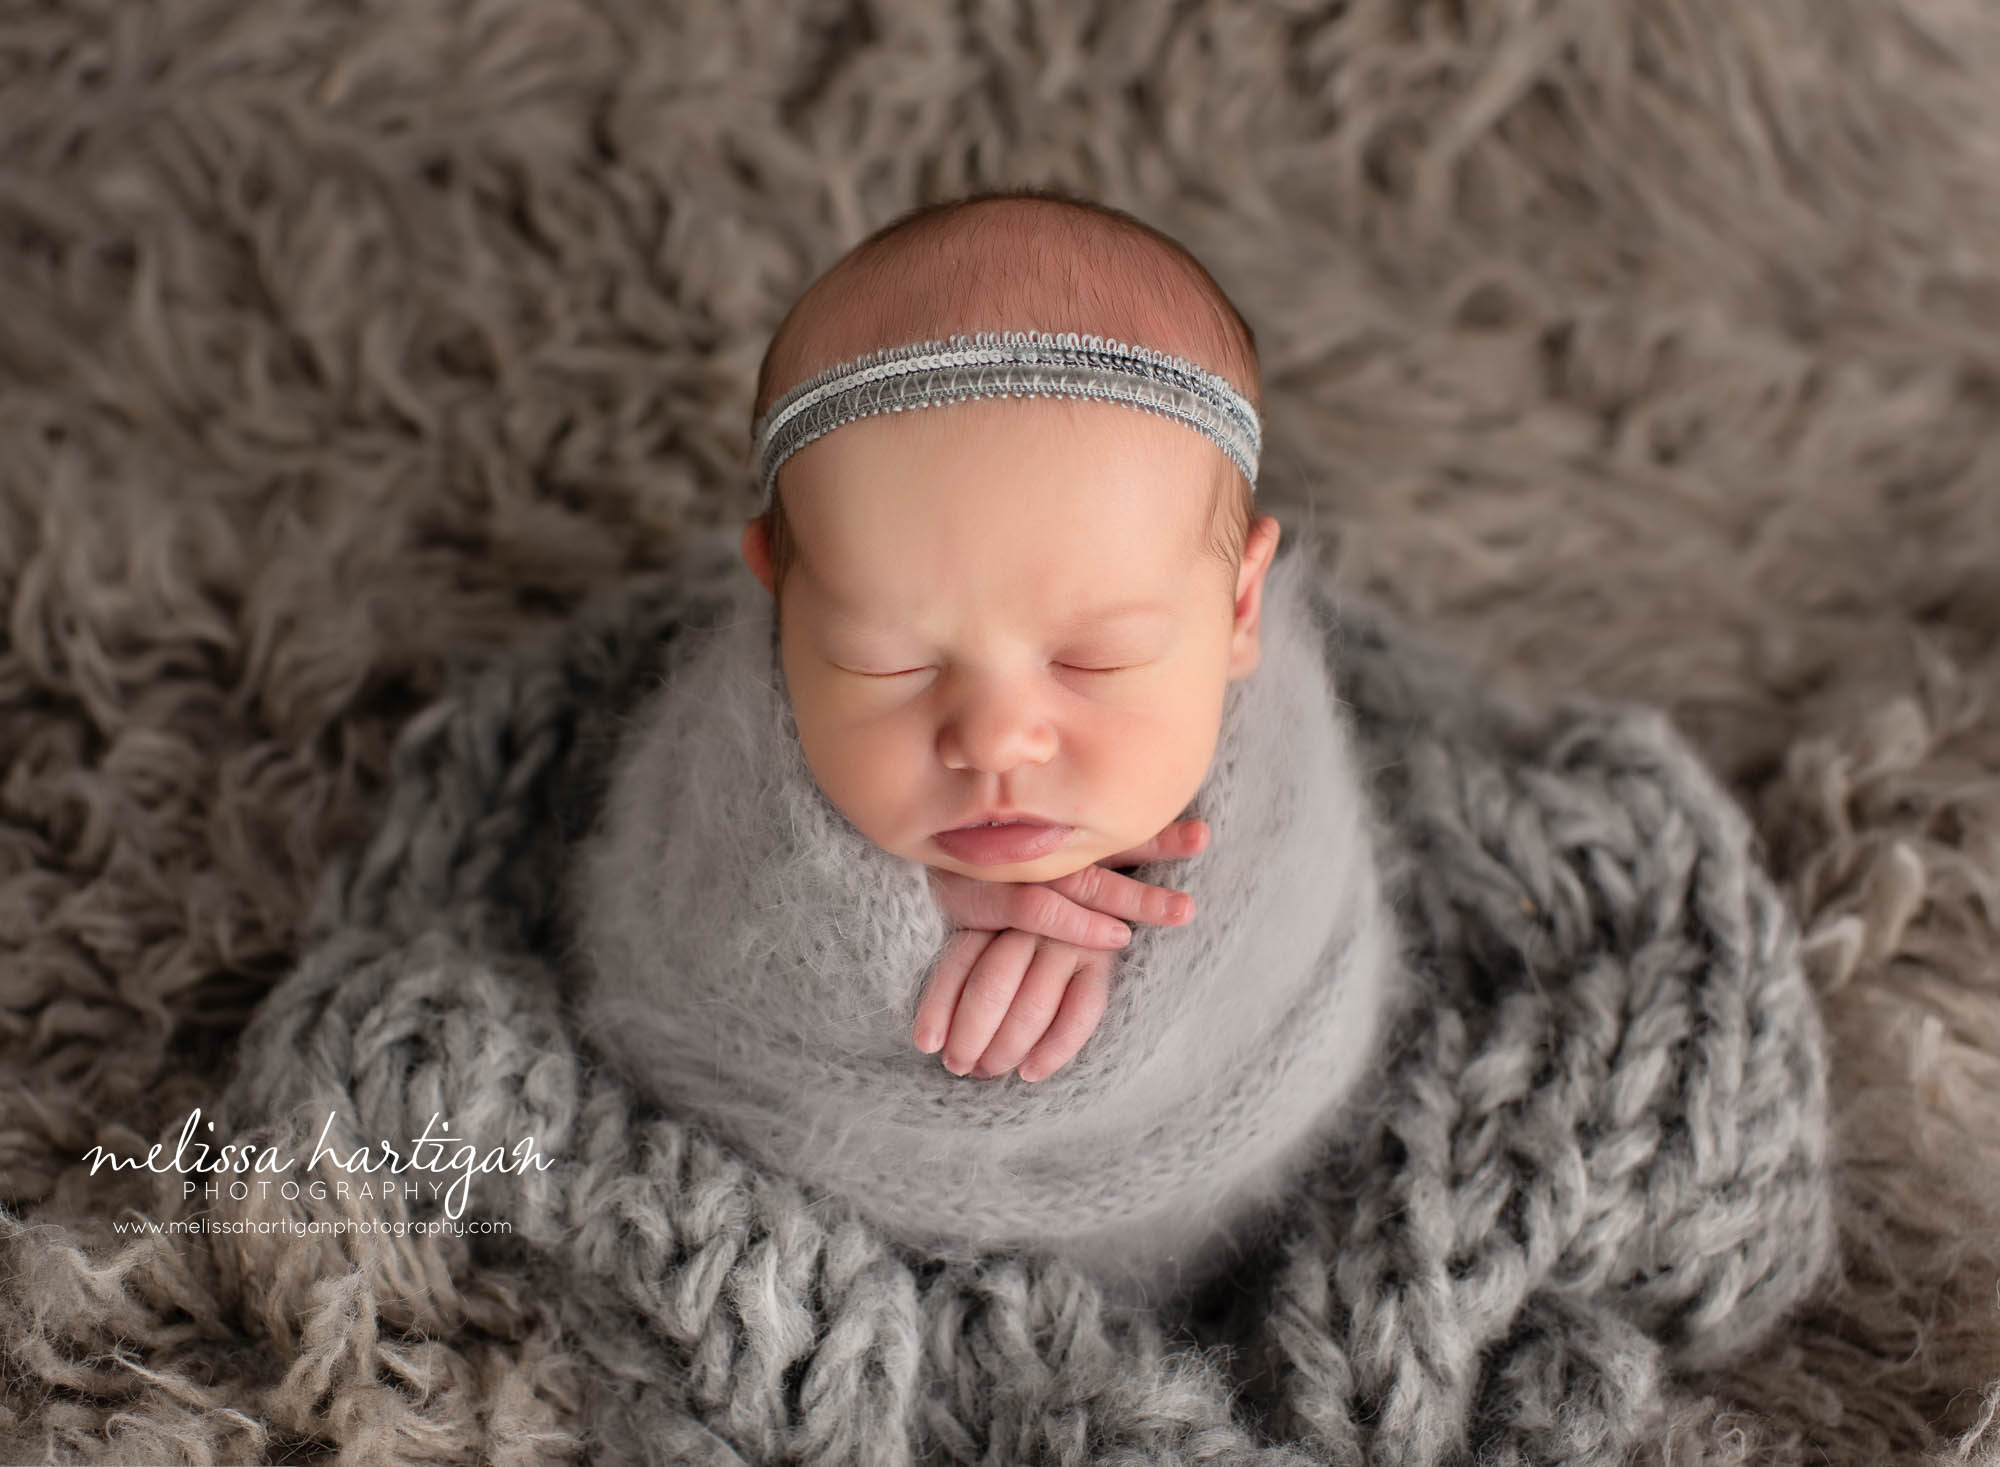 newborn baby girl wrapped in knitted gray wrap with headband